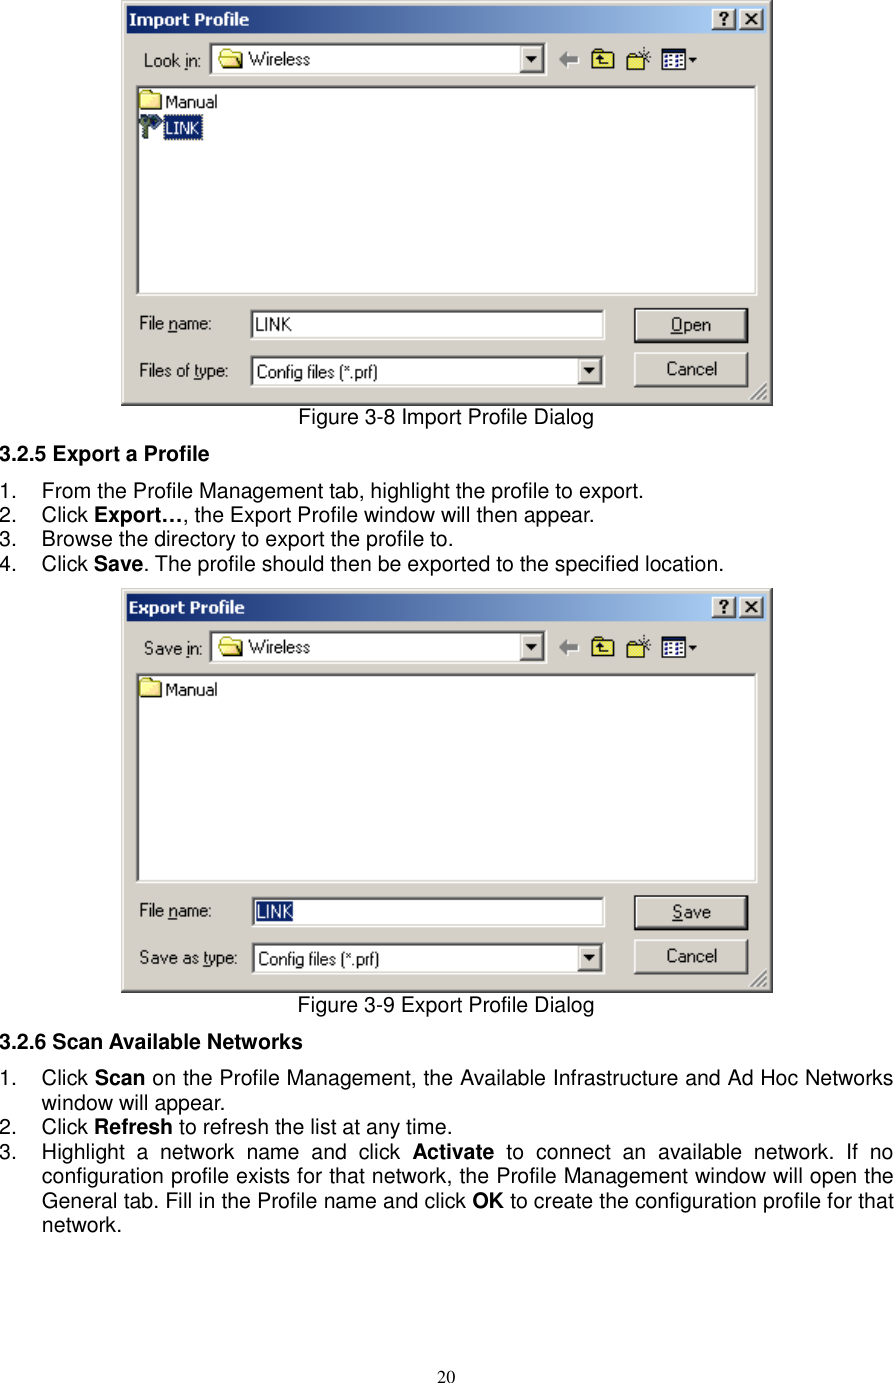  20  Figure 3-8 Import Profile Dialog 3.2.5 Export a Profile 1.  From the Profile Management tab, highlight the profile to export. 2.  Click Export…, the Export Profile window will then appear. 3.  Browse the directory to export the profile to. 4.  Click Save. The profile should then be exported to the specified location.  Figure 3-9 Export Profile Dialog 3.2.6 Scan Available Networks 1.  Click Scan on the Profile Management, the Available Infrastructure and Ad Hoc Networks window will appear. 2.  Click Refresh to refresh the list at any time. 3.  Highlight  a  network  name  and  click  Activate  to  connect  an  available  network.  If  no configuration profile exists for that network, the Profile Management window will open the General tab. Fill in the Profile name and click OK to create the configuration profile for that network. 